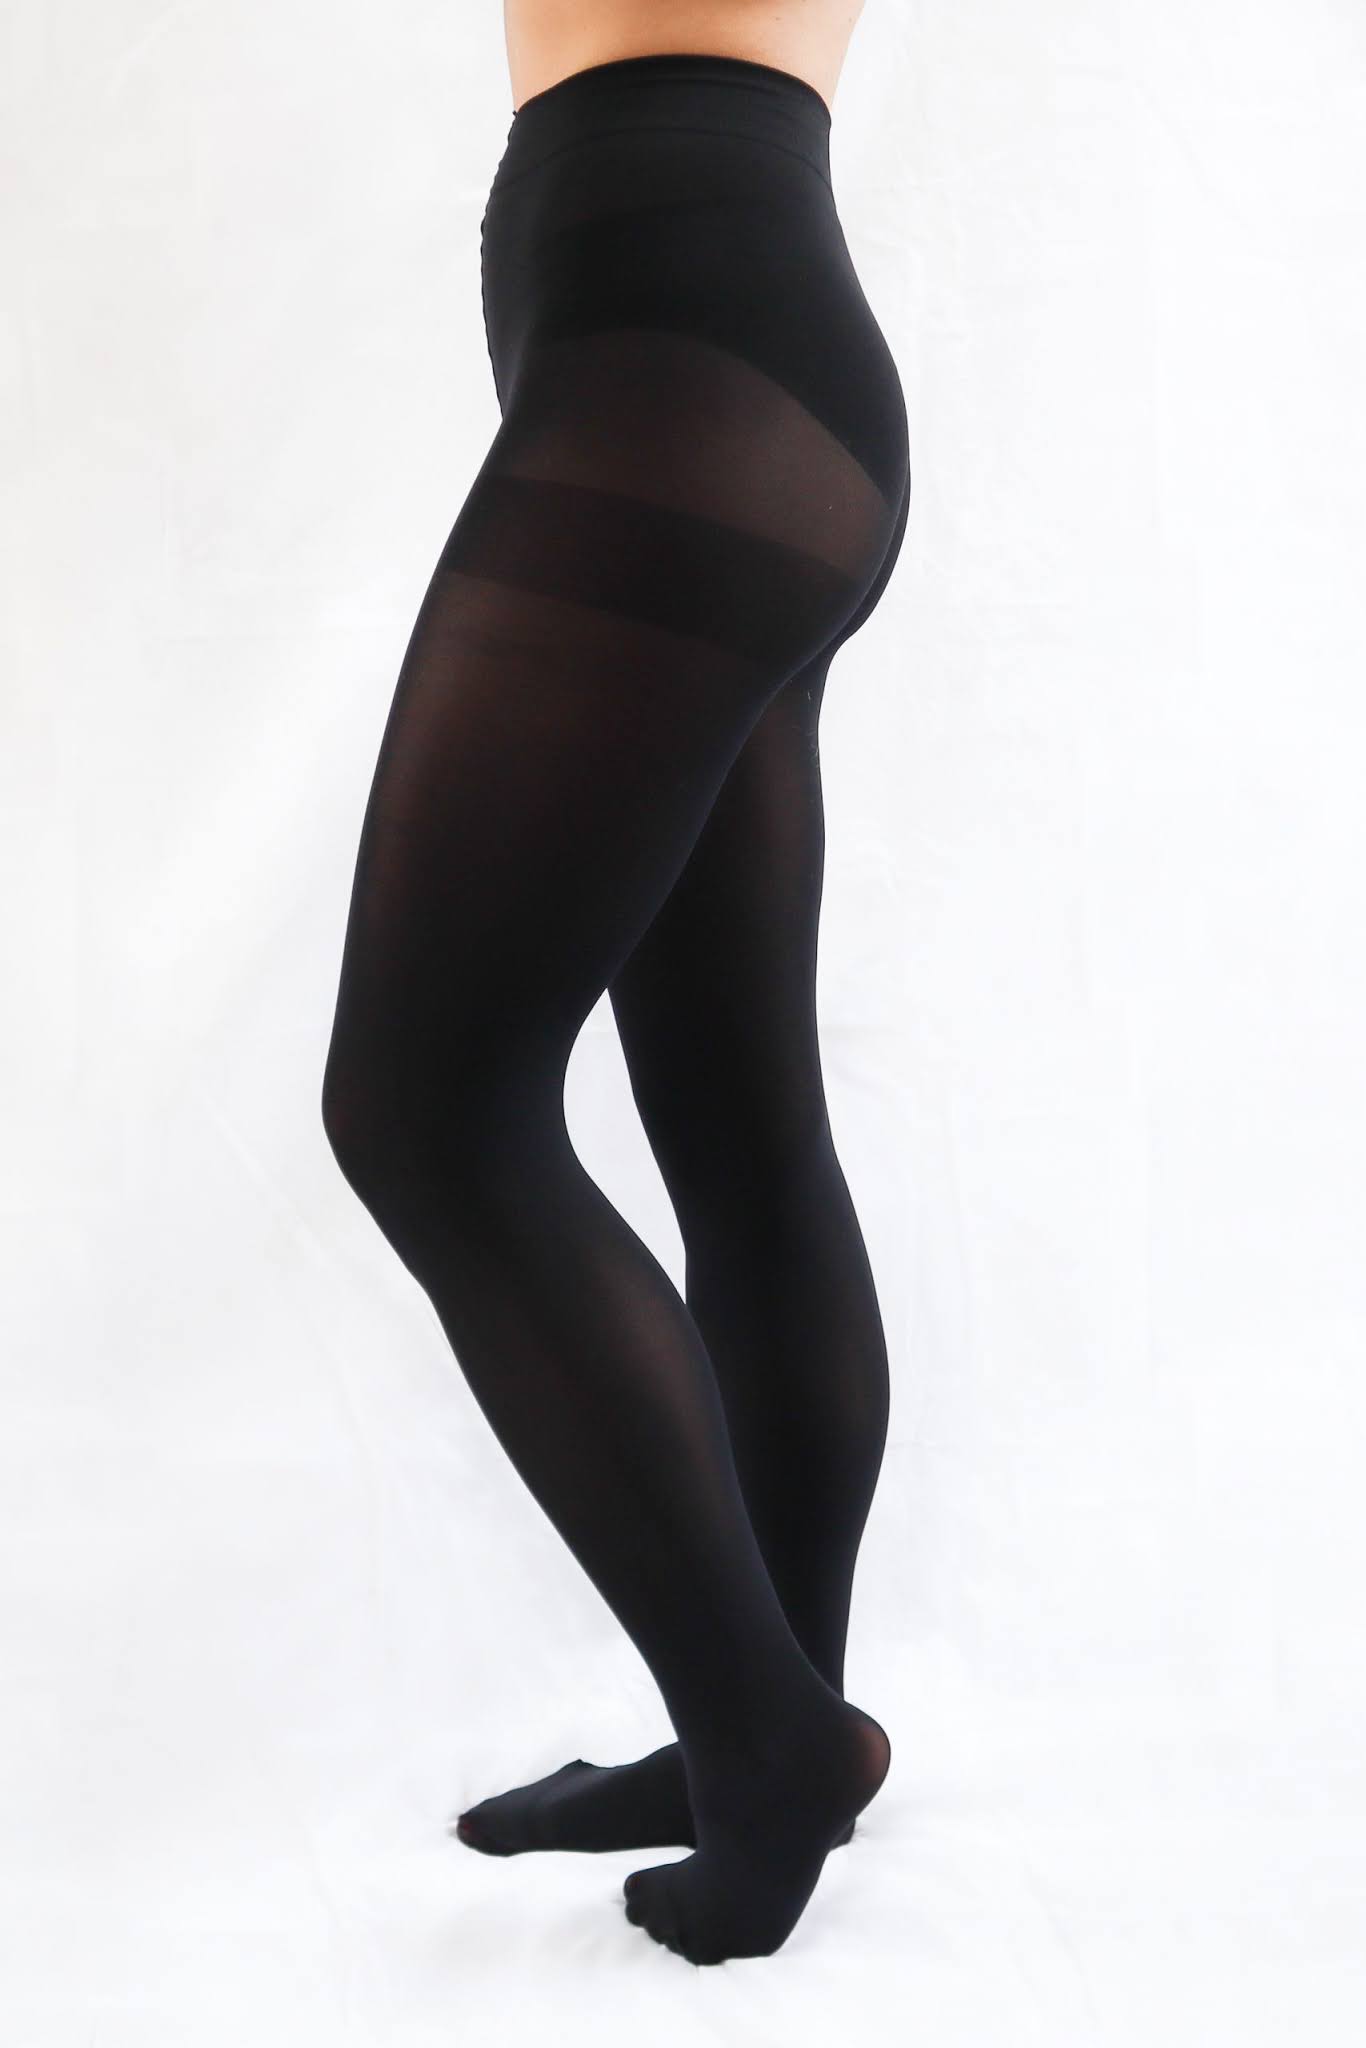 Hosiery For Men: Reviewed: 80 Denier Recycled Opaque Tights From The Tights  Club